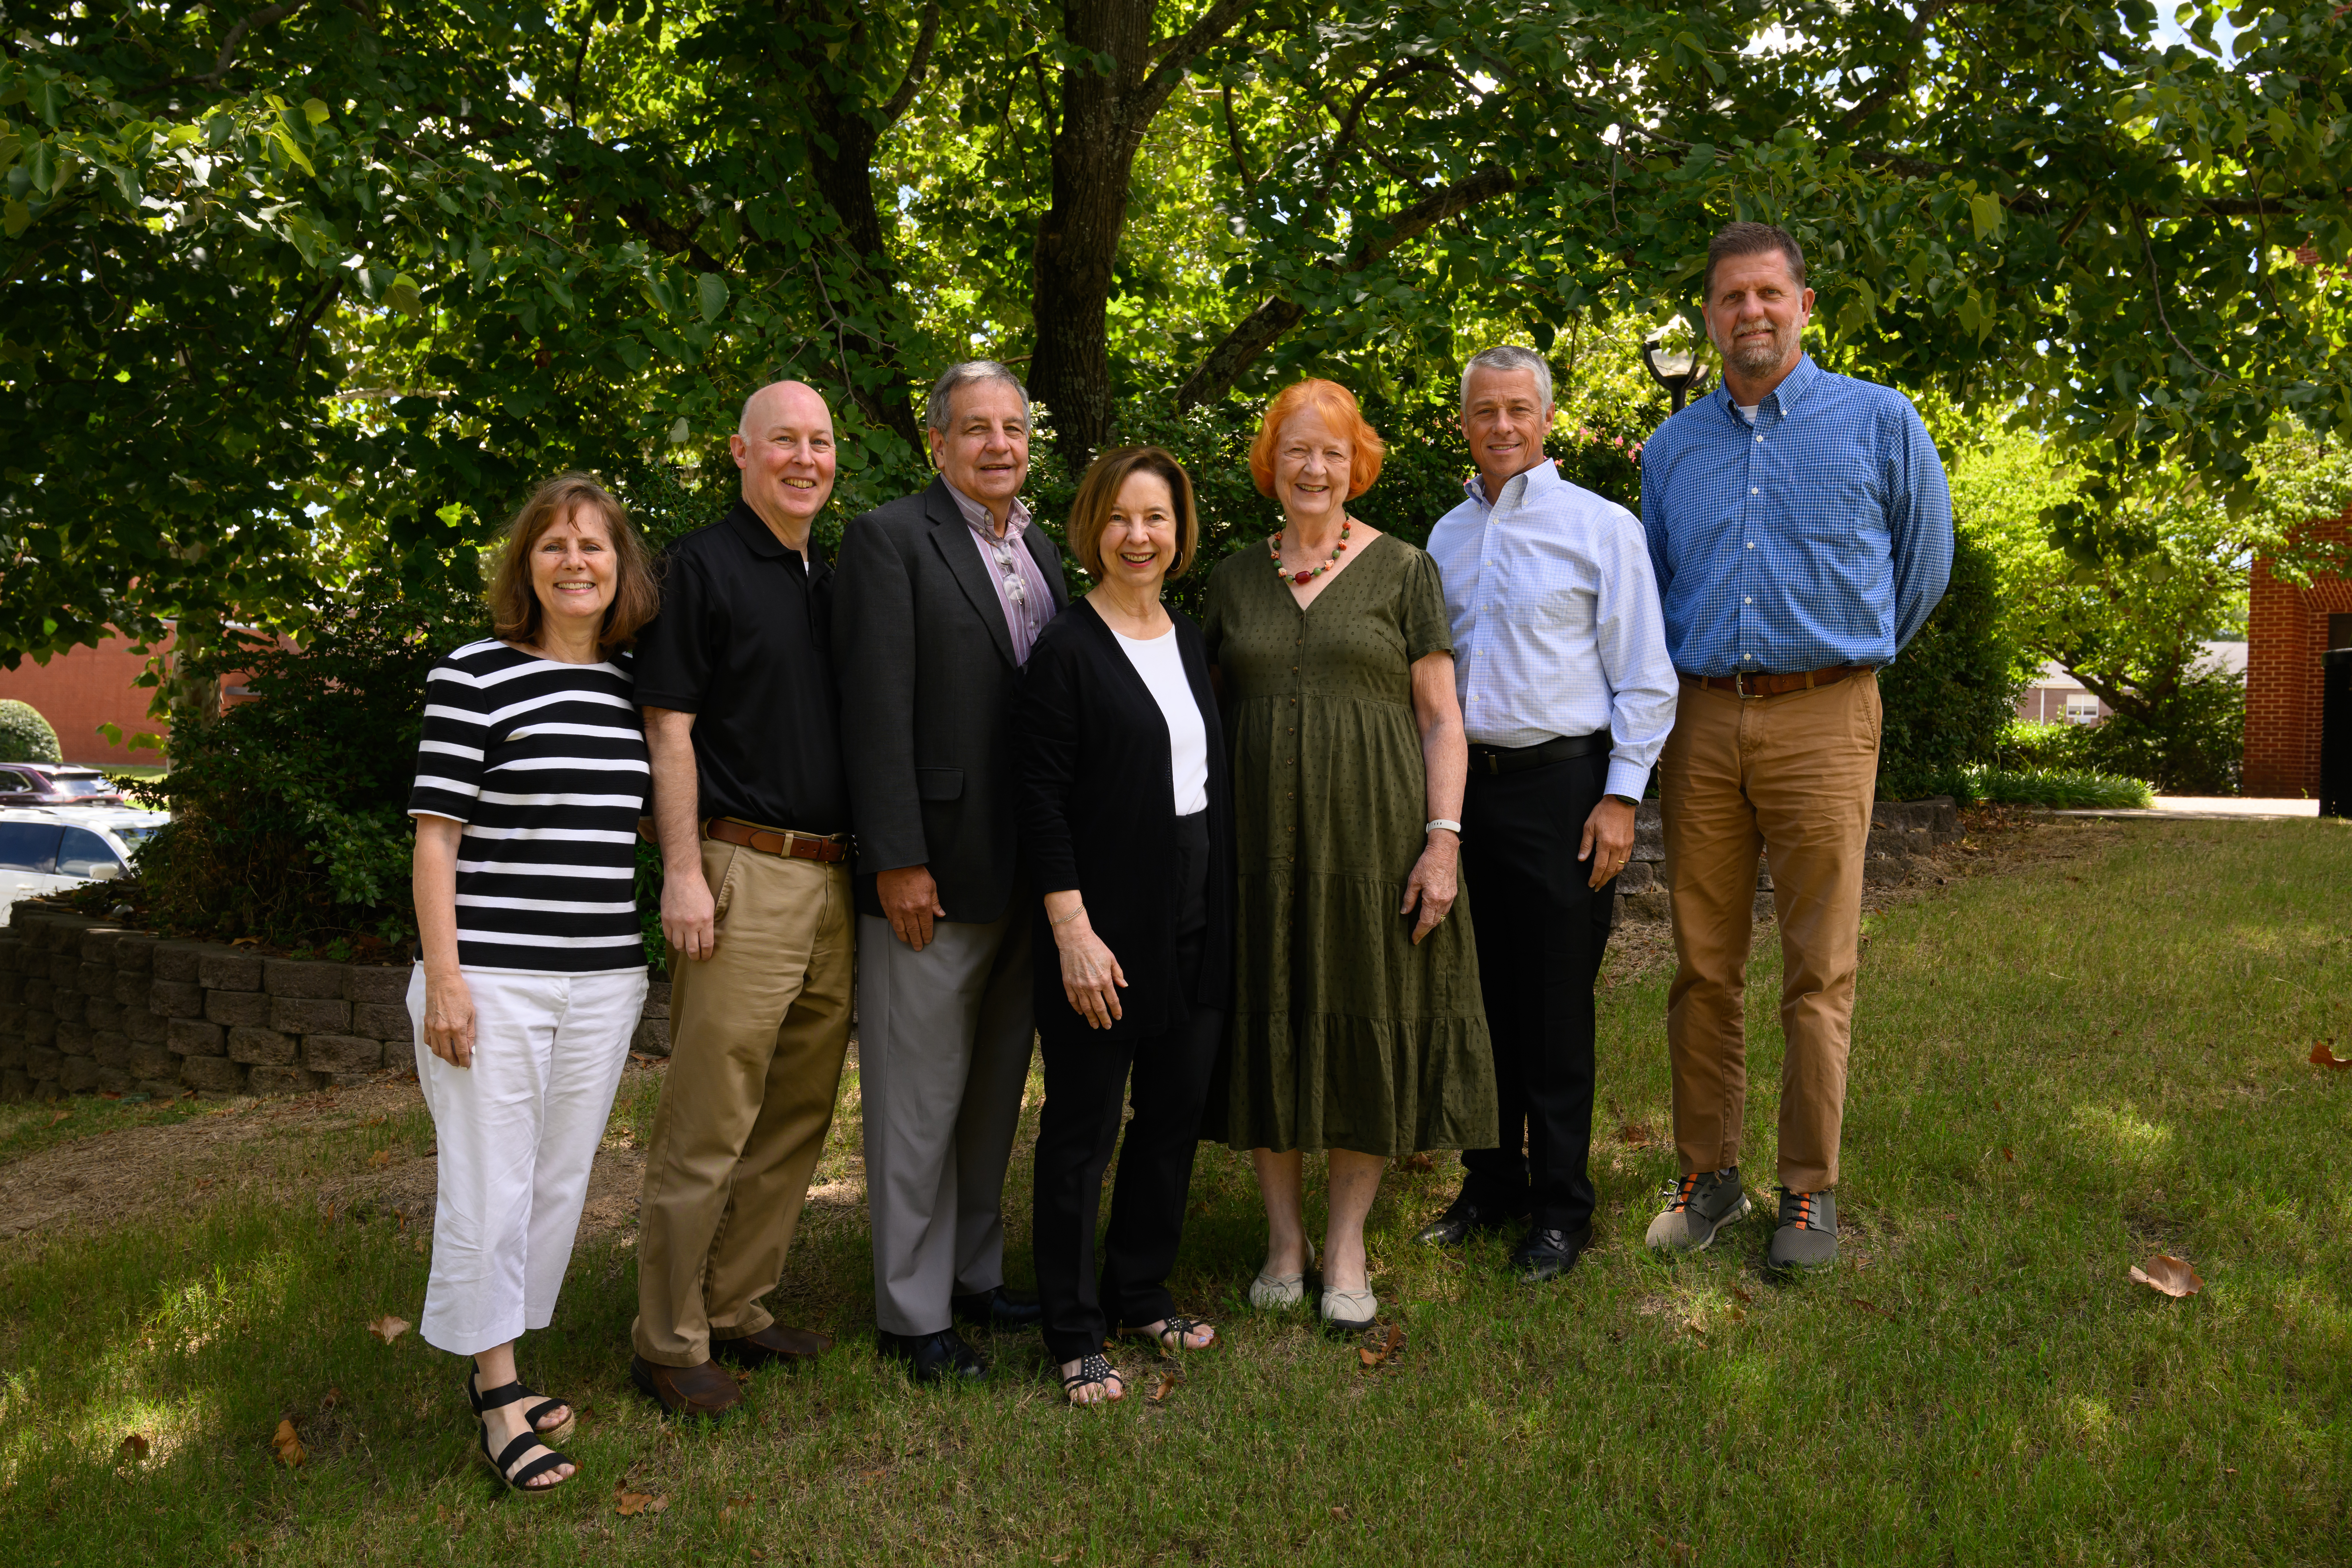 Group photo of inaugural Faculty Leadership Council members 2019-2020